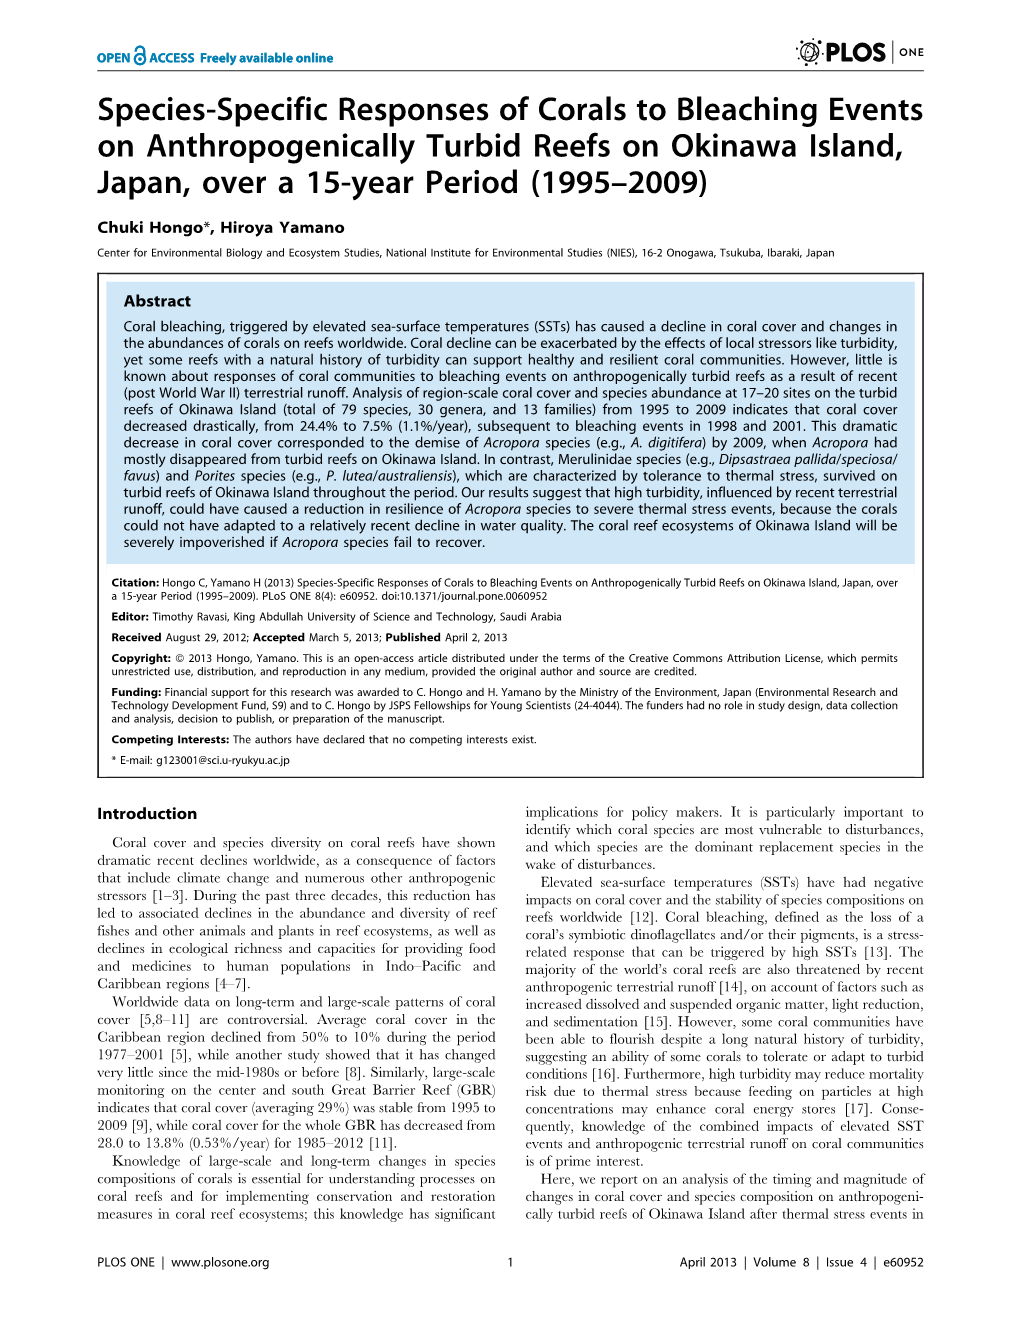 Species-Specific Responses of Corals to Bleaching Events on Anthropogenically Turbid Reefs on Okinawa Island, Japan, Over a 15-Year Period (1995–2009)